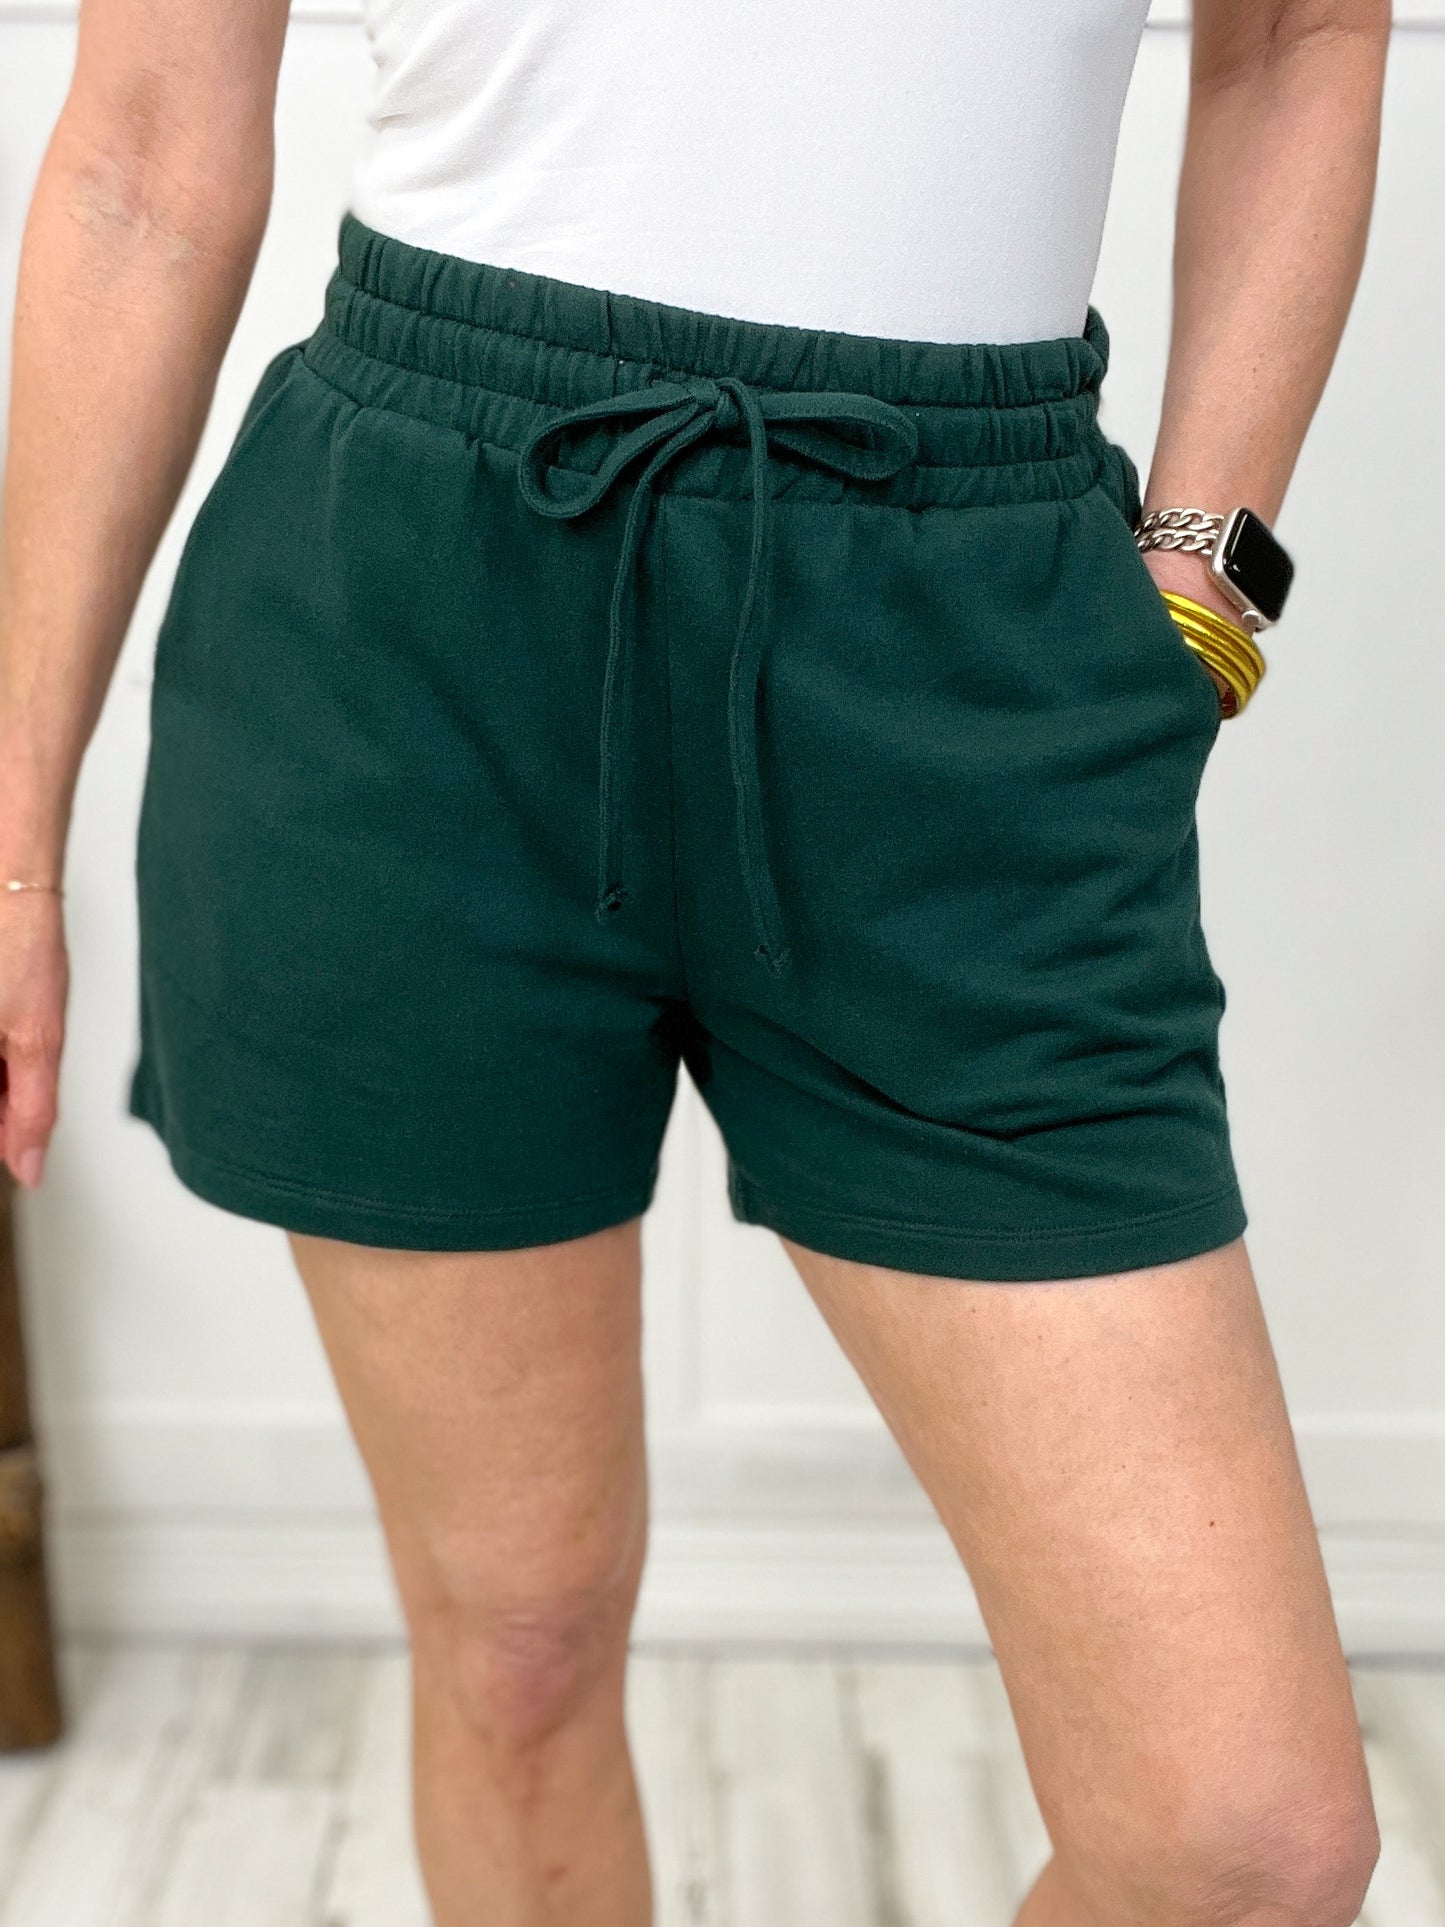 Let's Hang Out Lounge Shorts